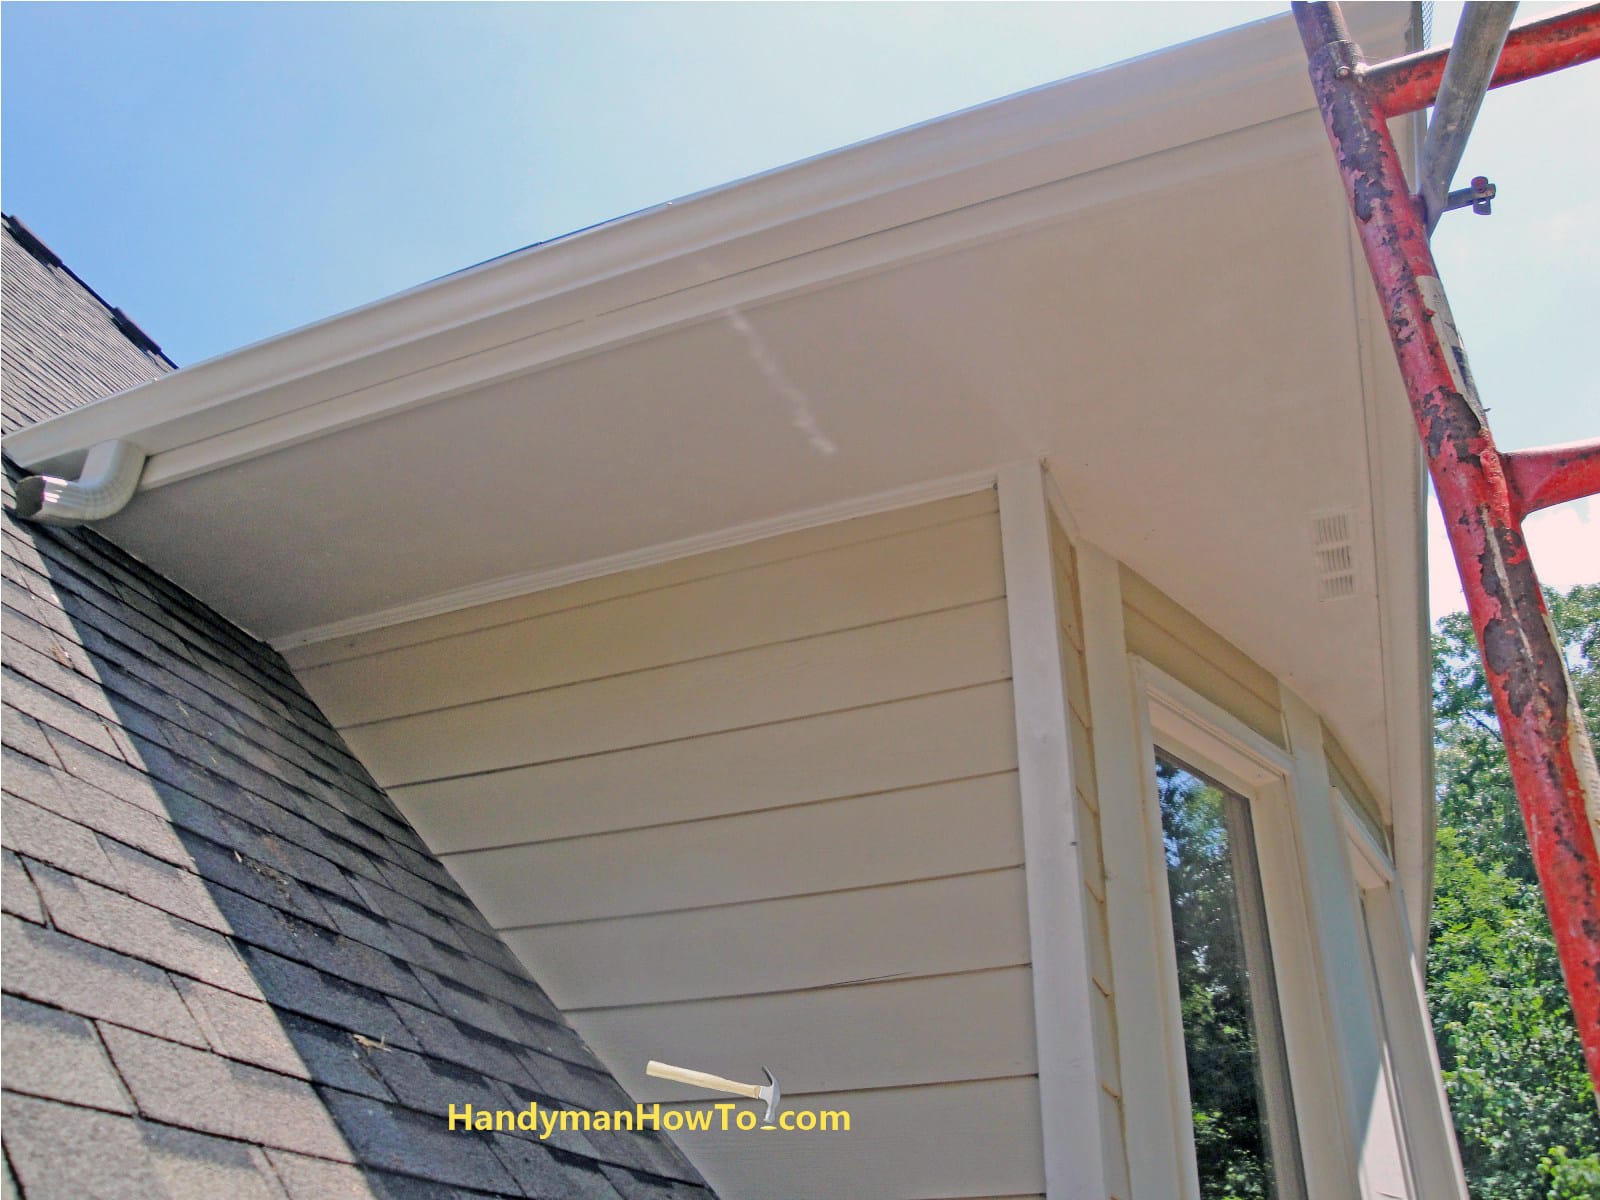 How do you find a contractor that handles soffit roof repairs?